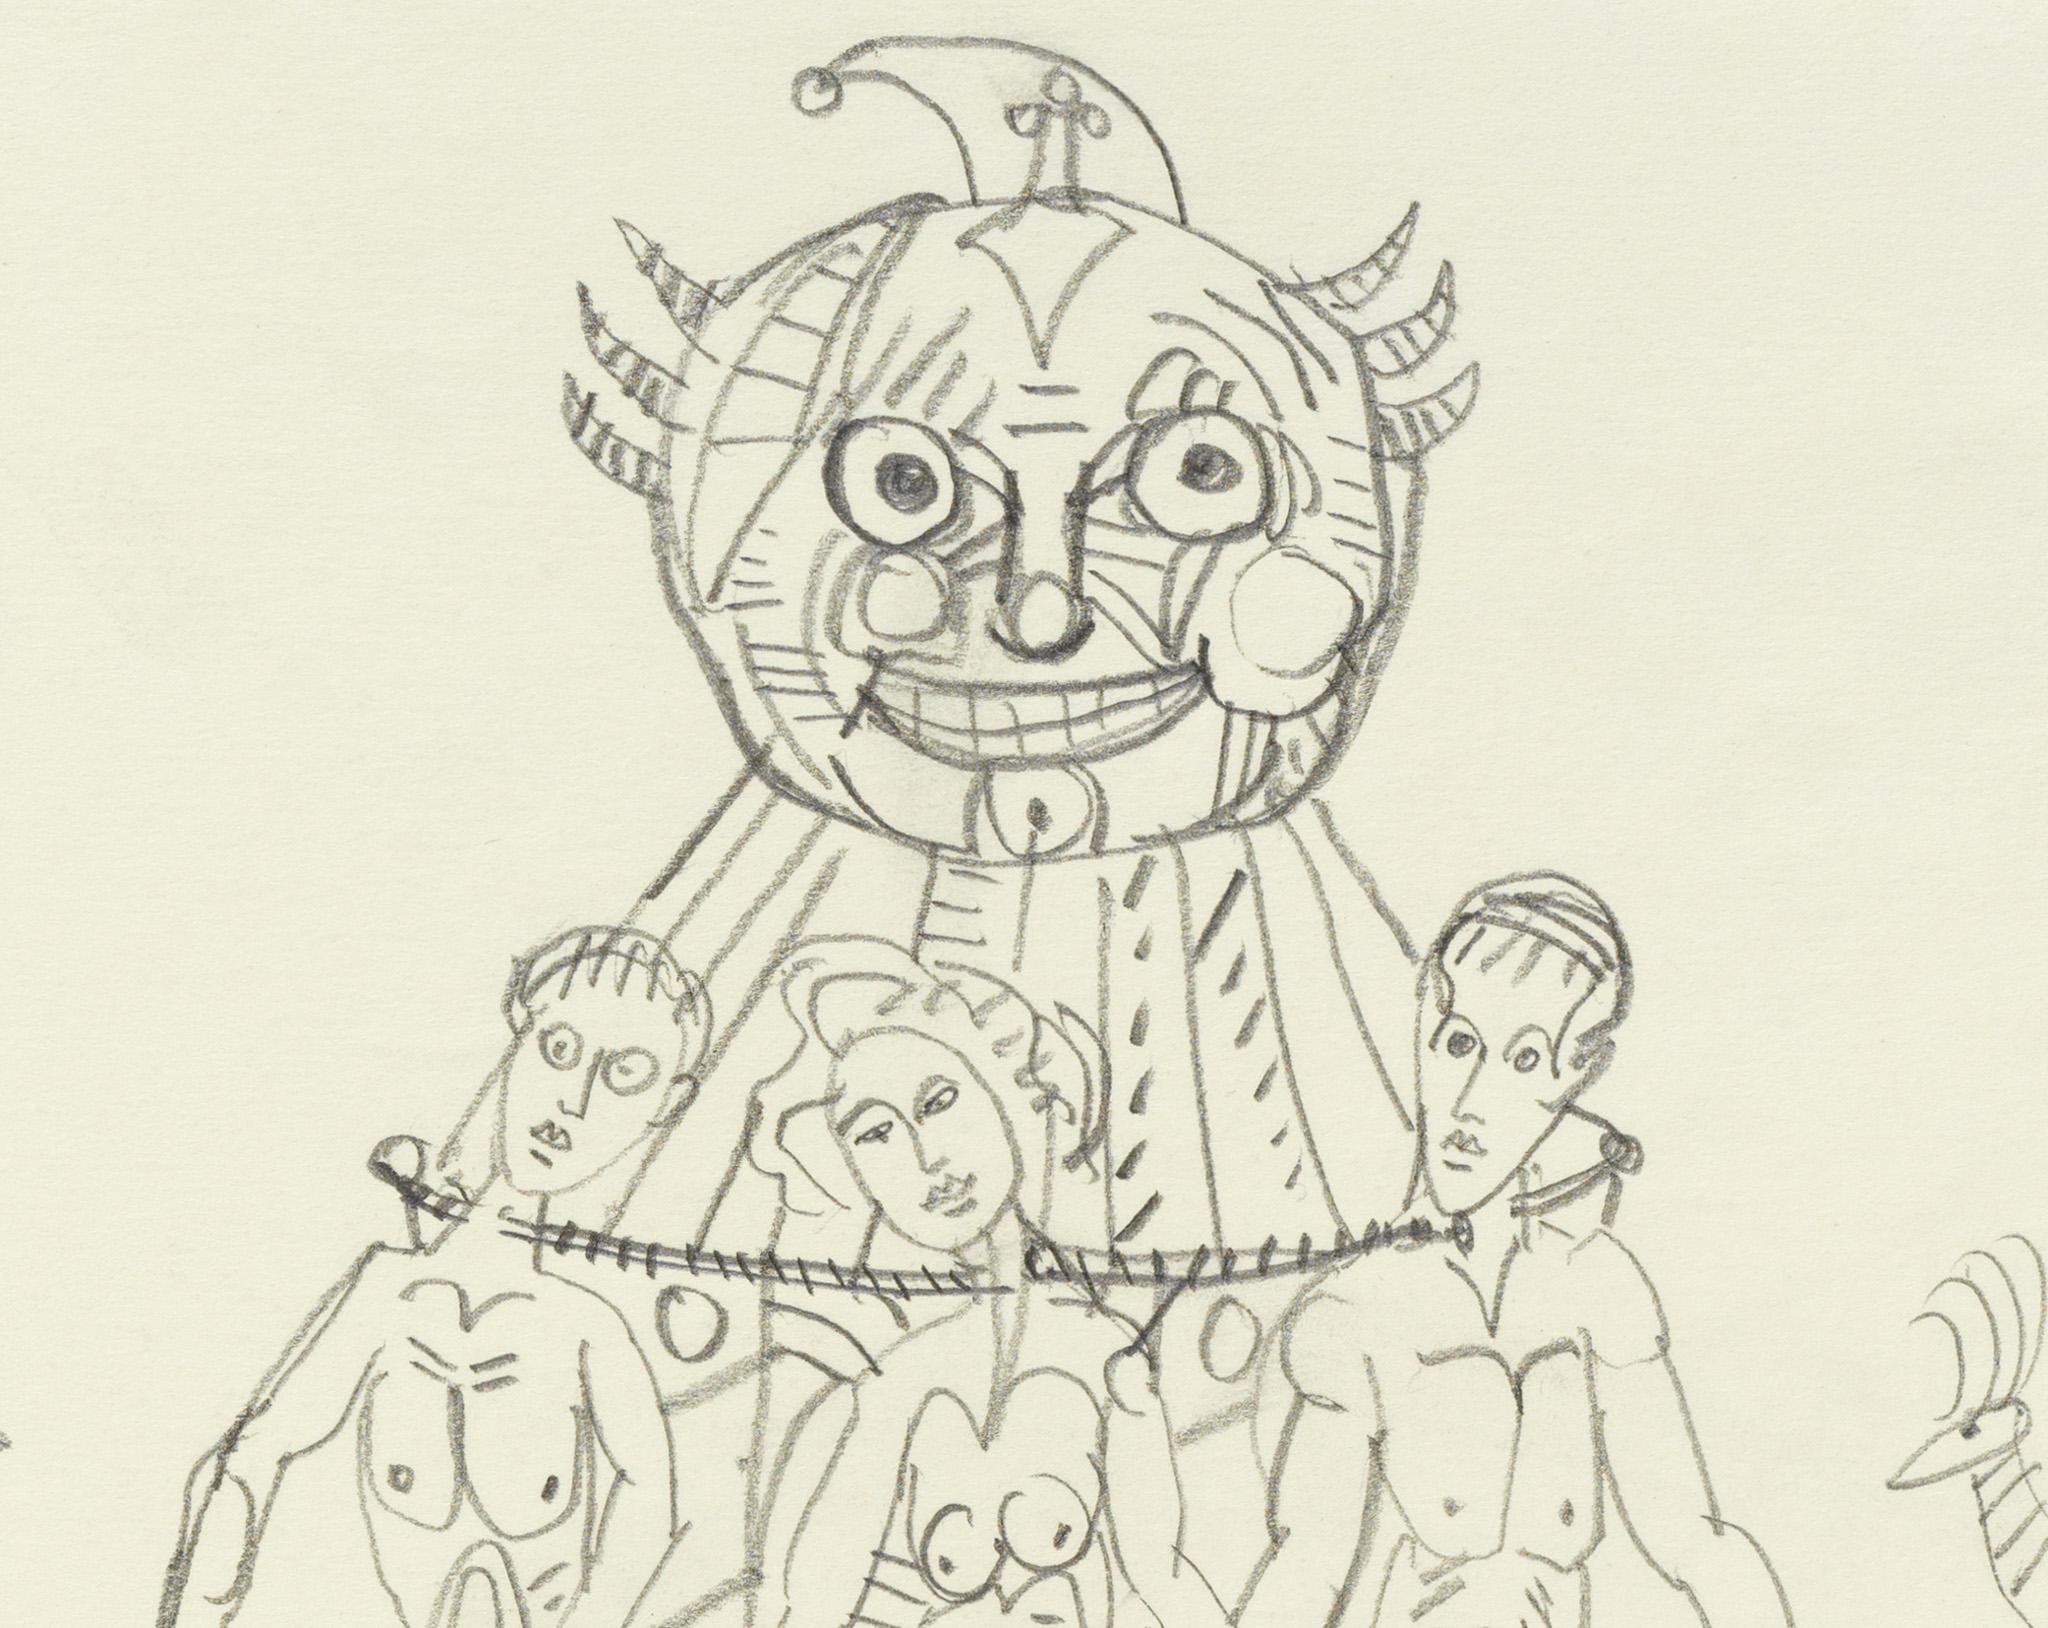 a graphite drawing of a various characters and creatures in a tall formation